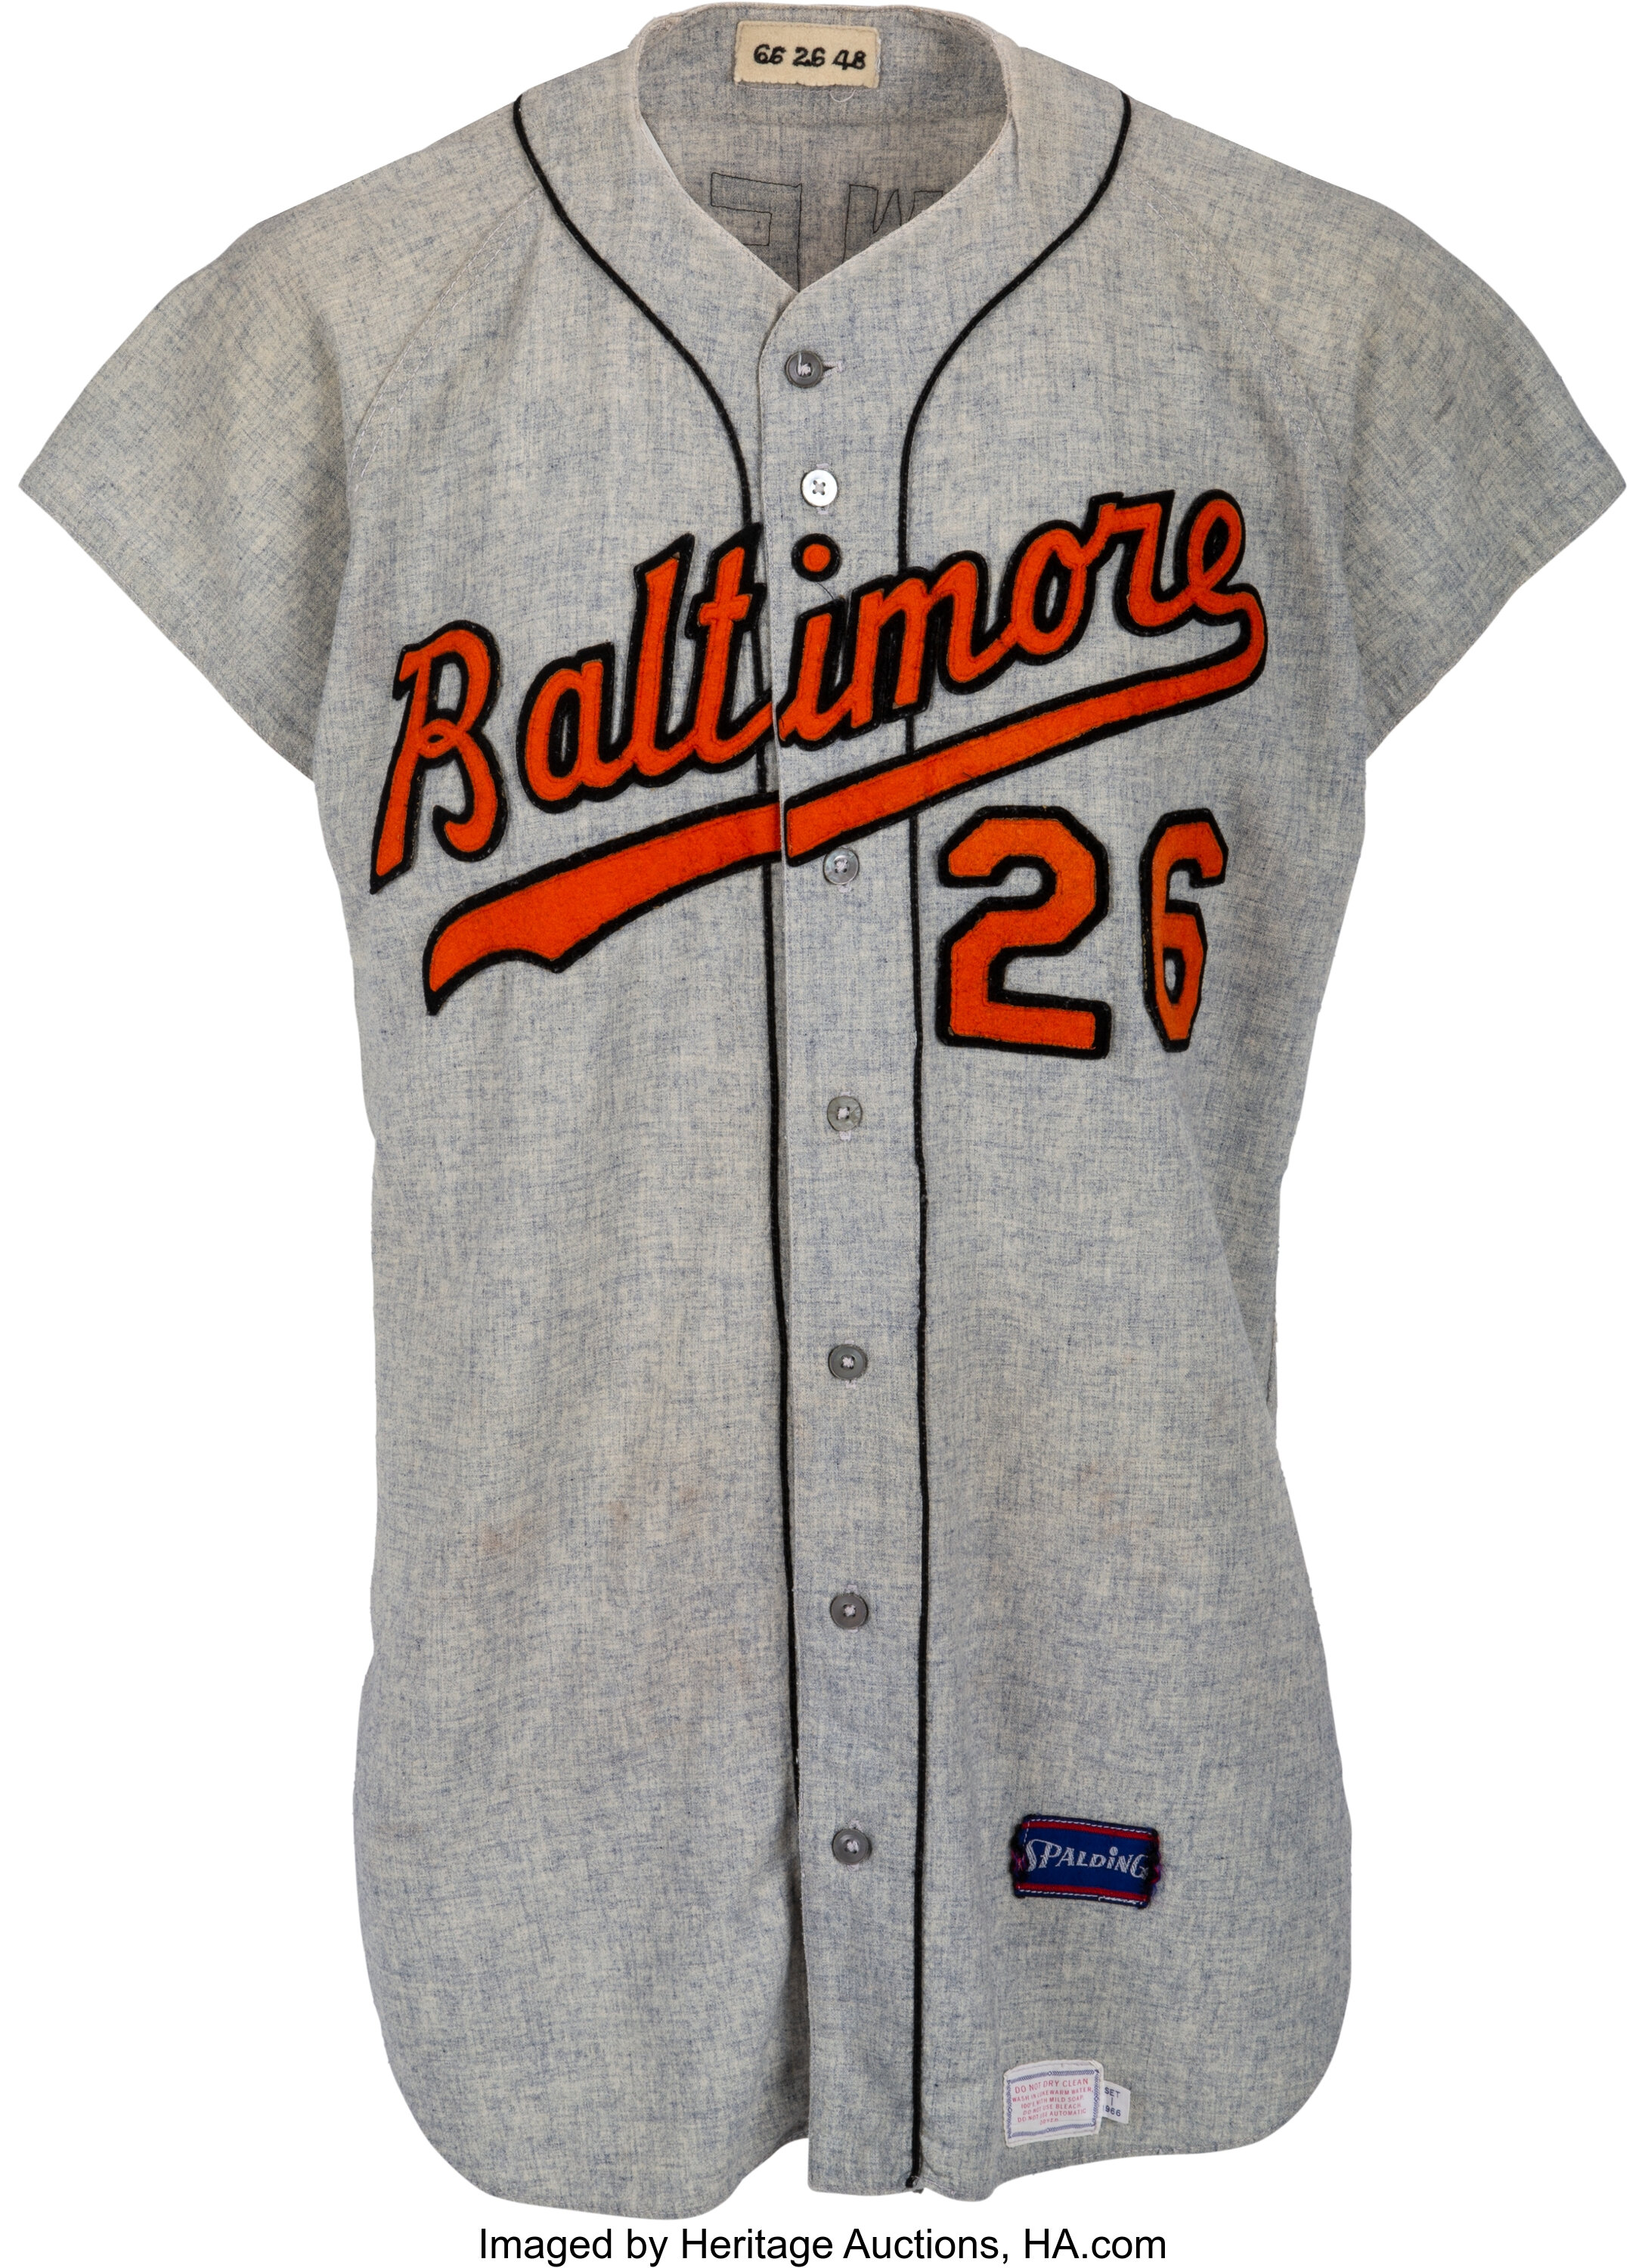 Orioles' 2016 Game-Used Gear Brought Big Bucks as Spring Jersey